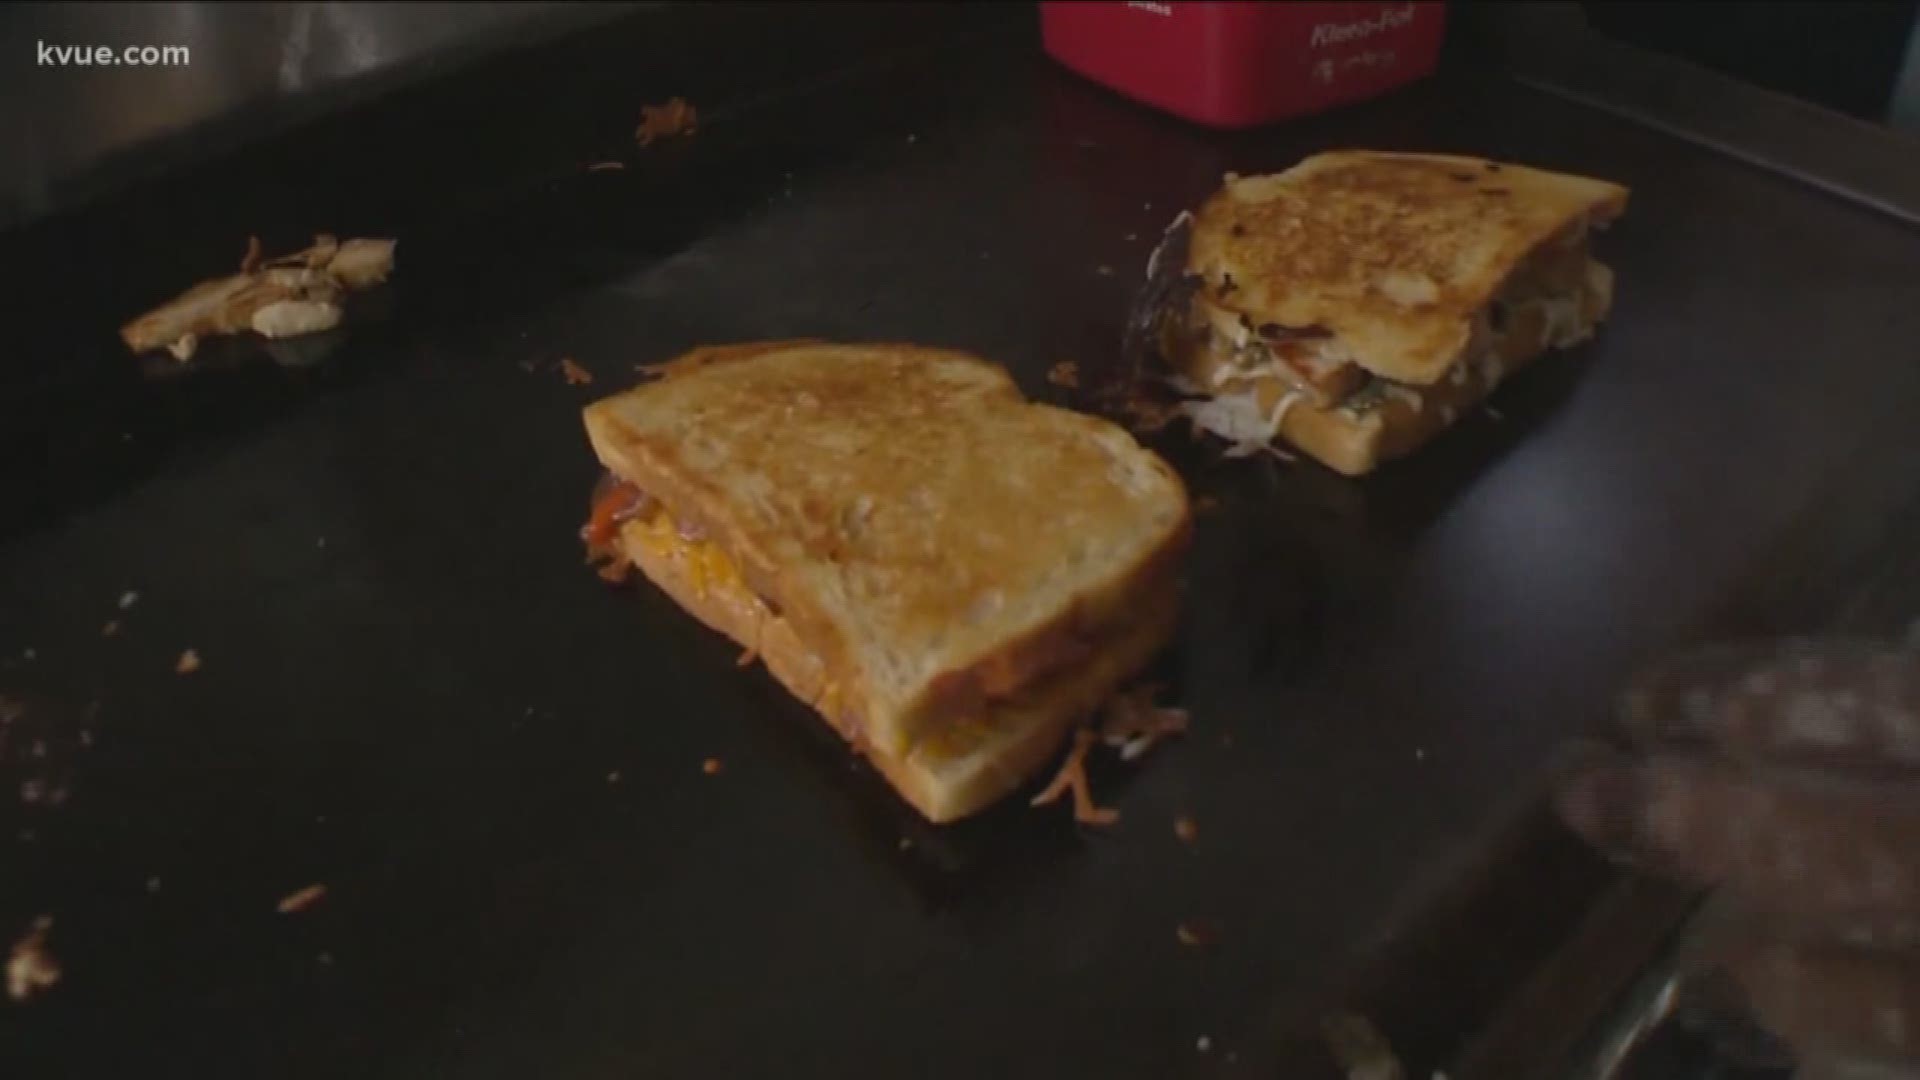 Brittany Flowers found a great spot in Austin to have a perfect grilled cheese sandwich.